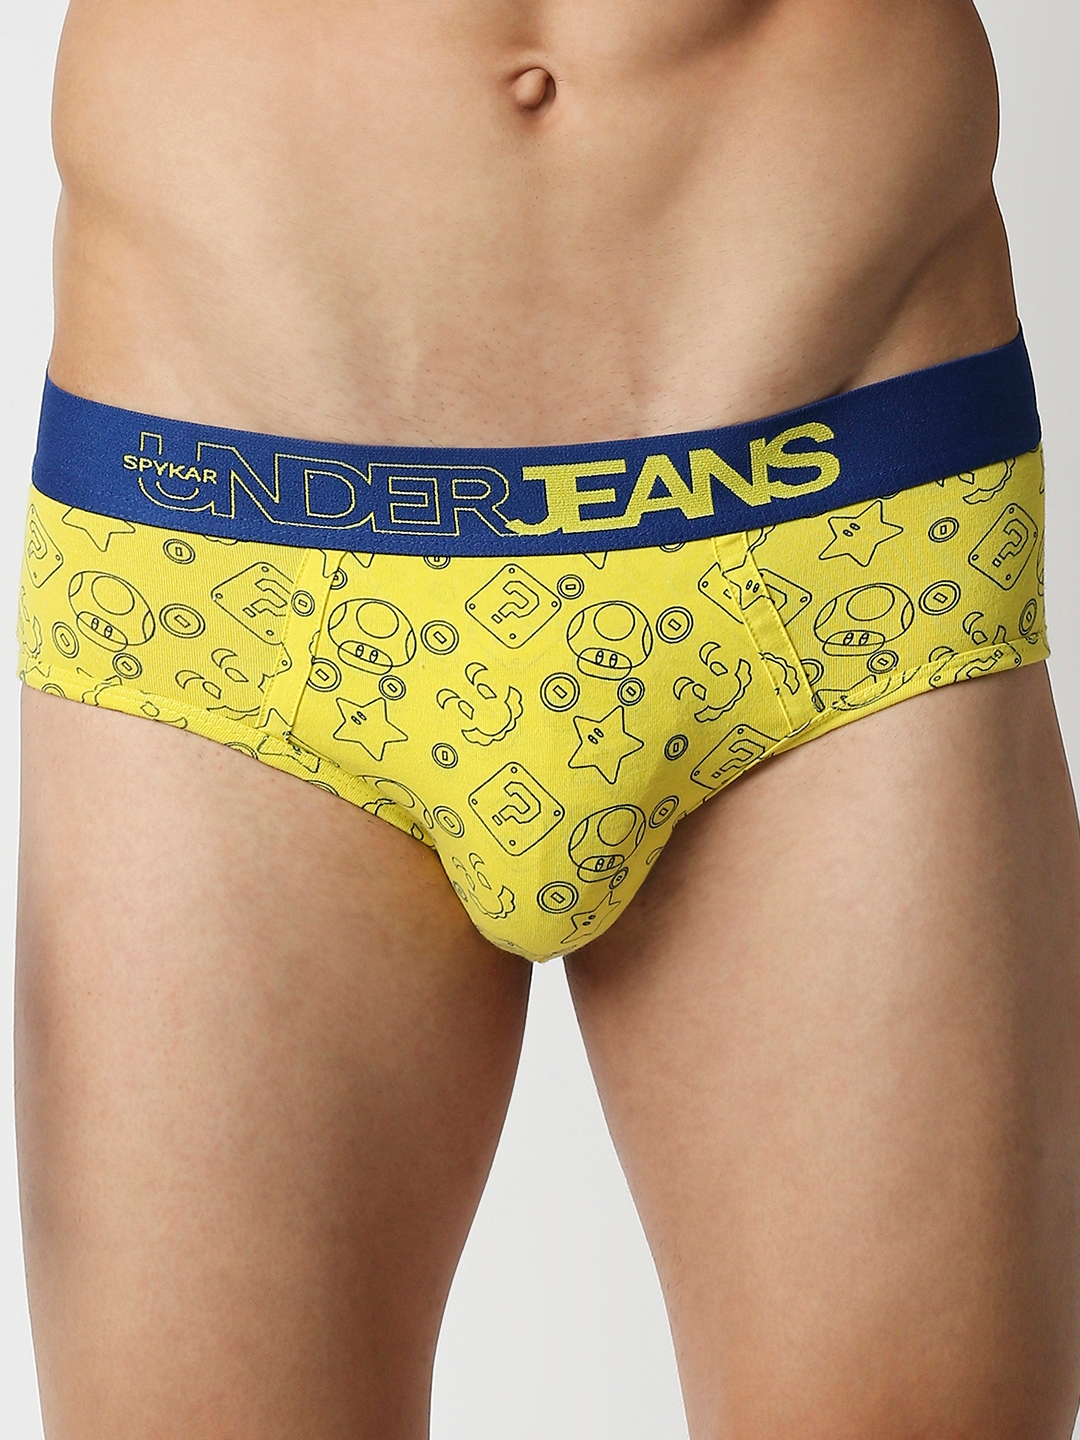 spykar | Underjeans by Spykar Premium Red Yellow & White Cotton Blend Printed Brief - Pack Of 3 2